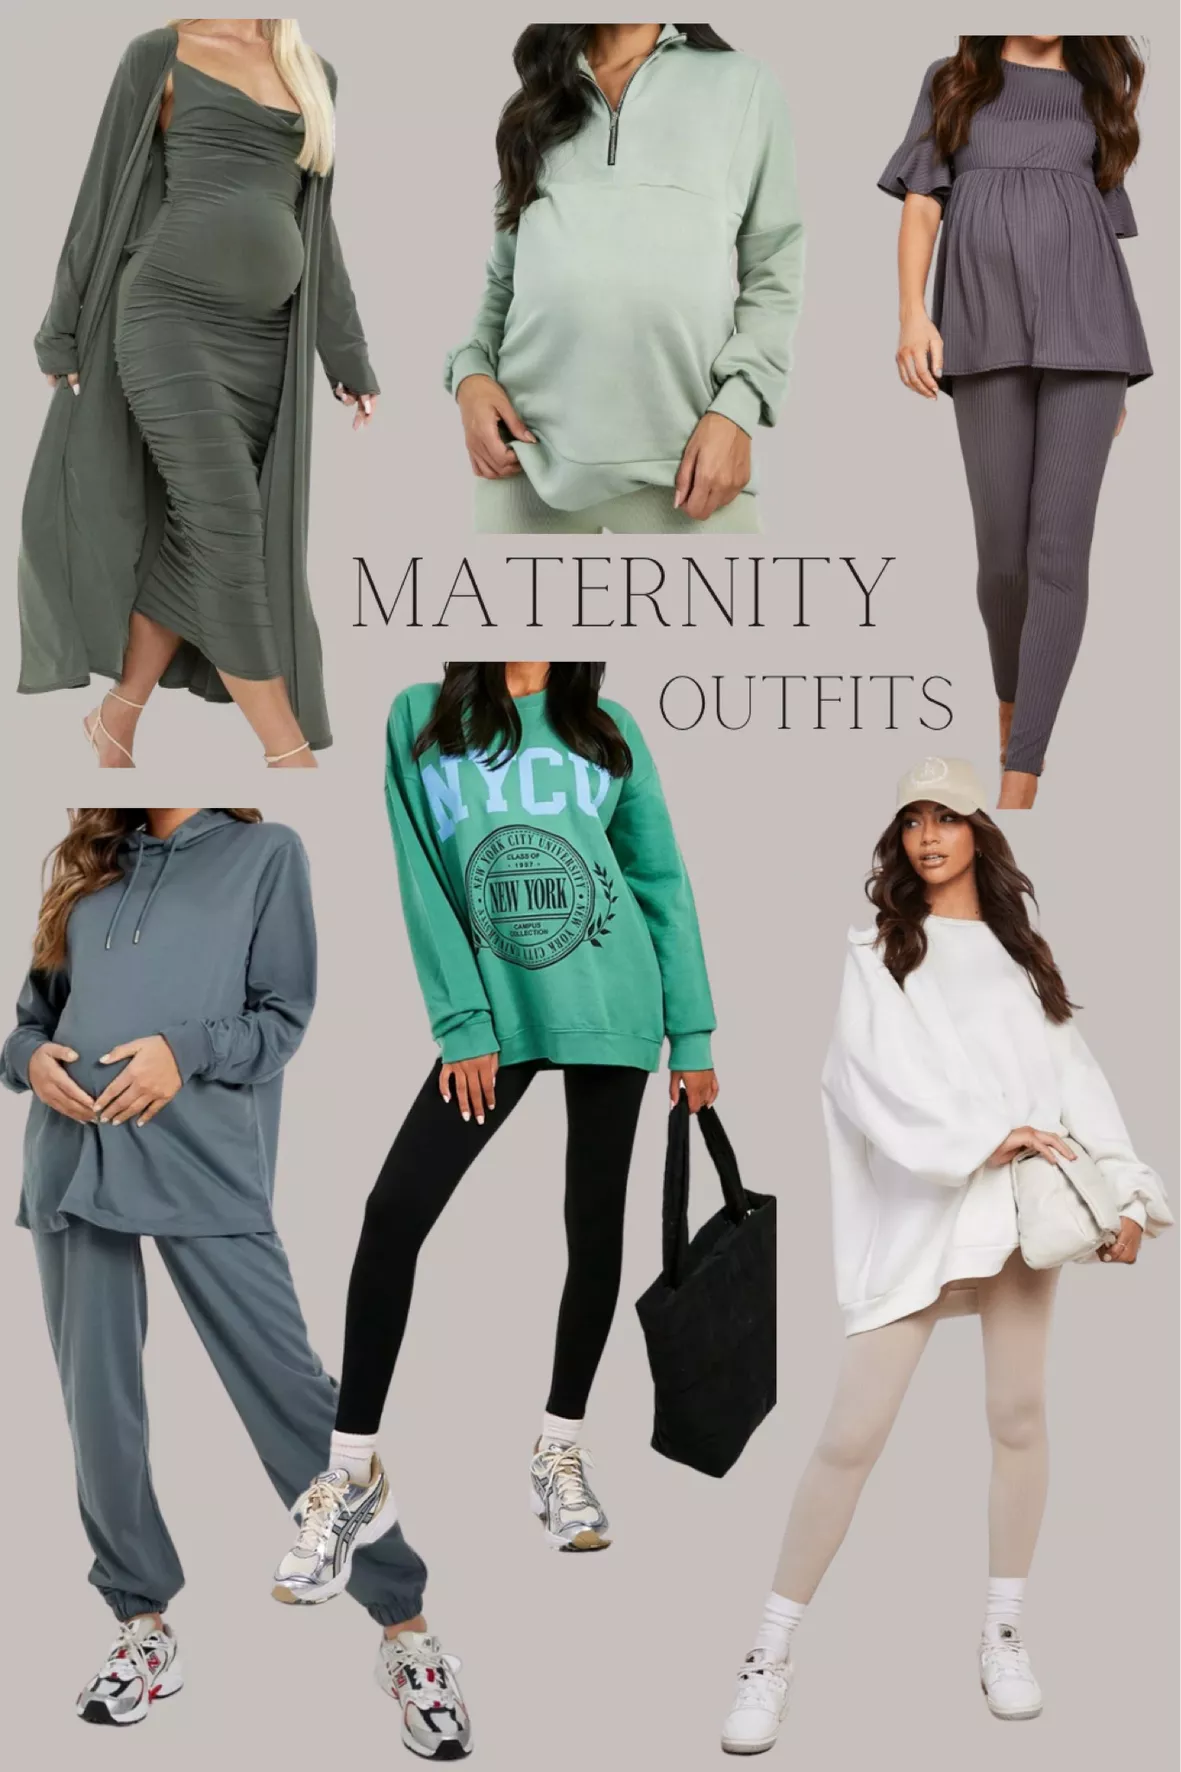 Where to buy cute and affordable maternity clothes